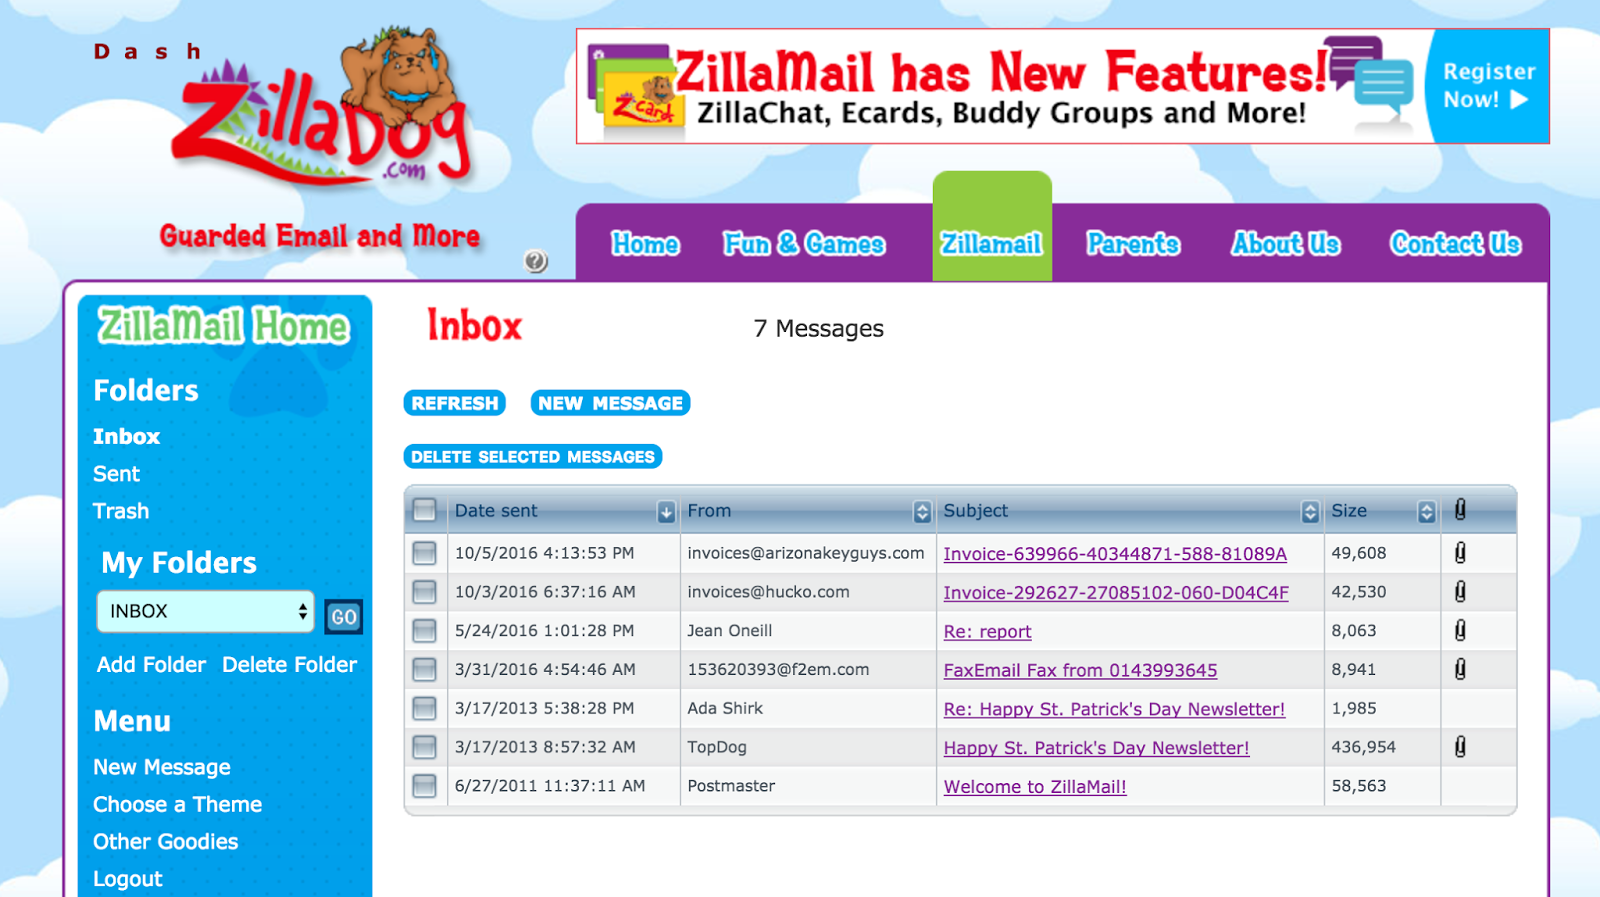 KidsEmail: A Safe and Fun Way for Kids to Email